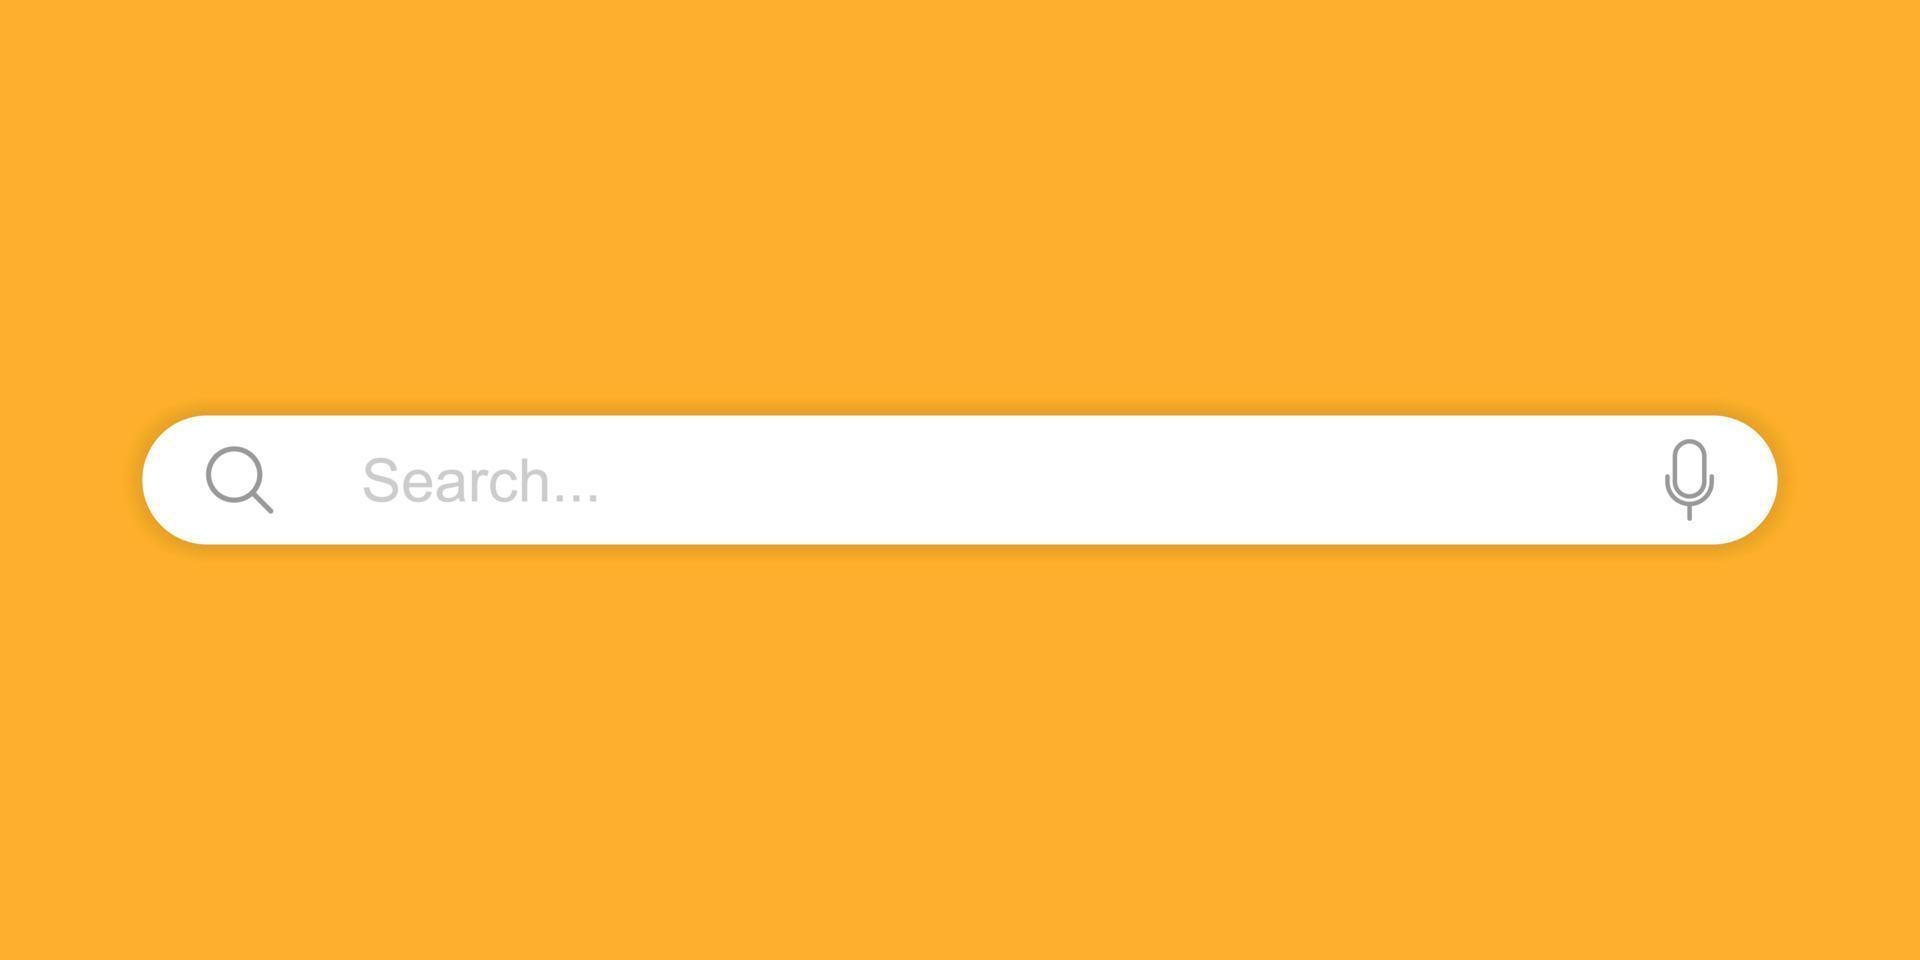 Search bar with shadow effect in flat style design isolated on yellow background. vector